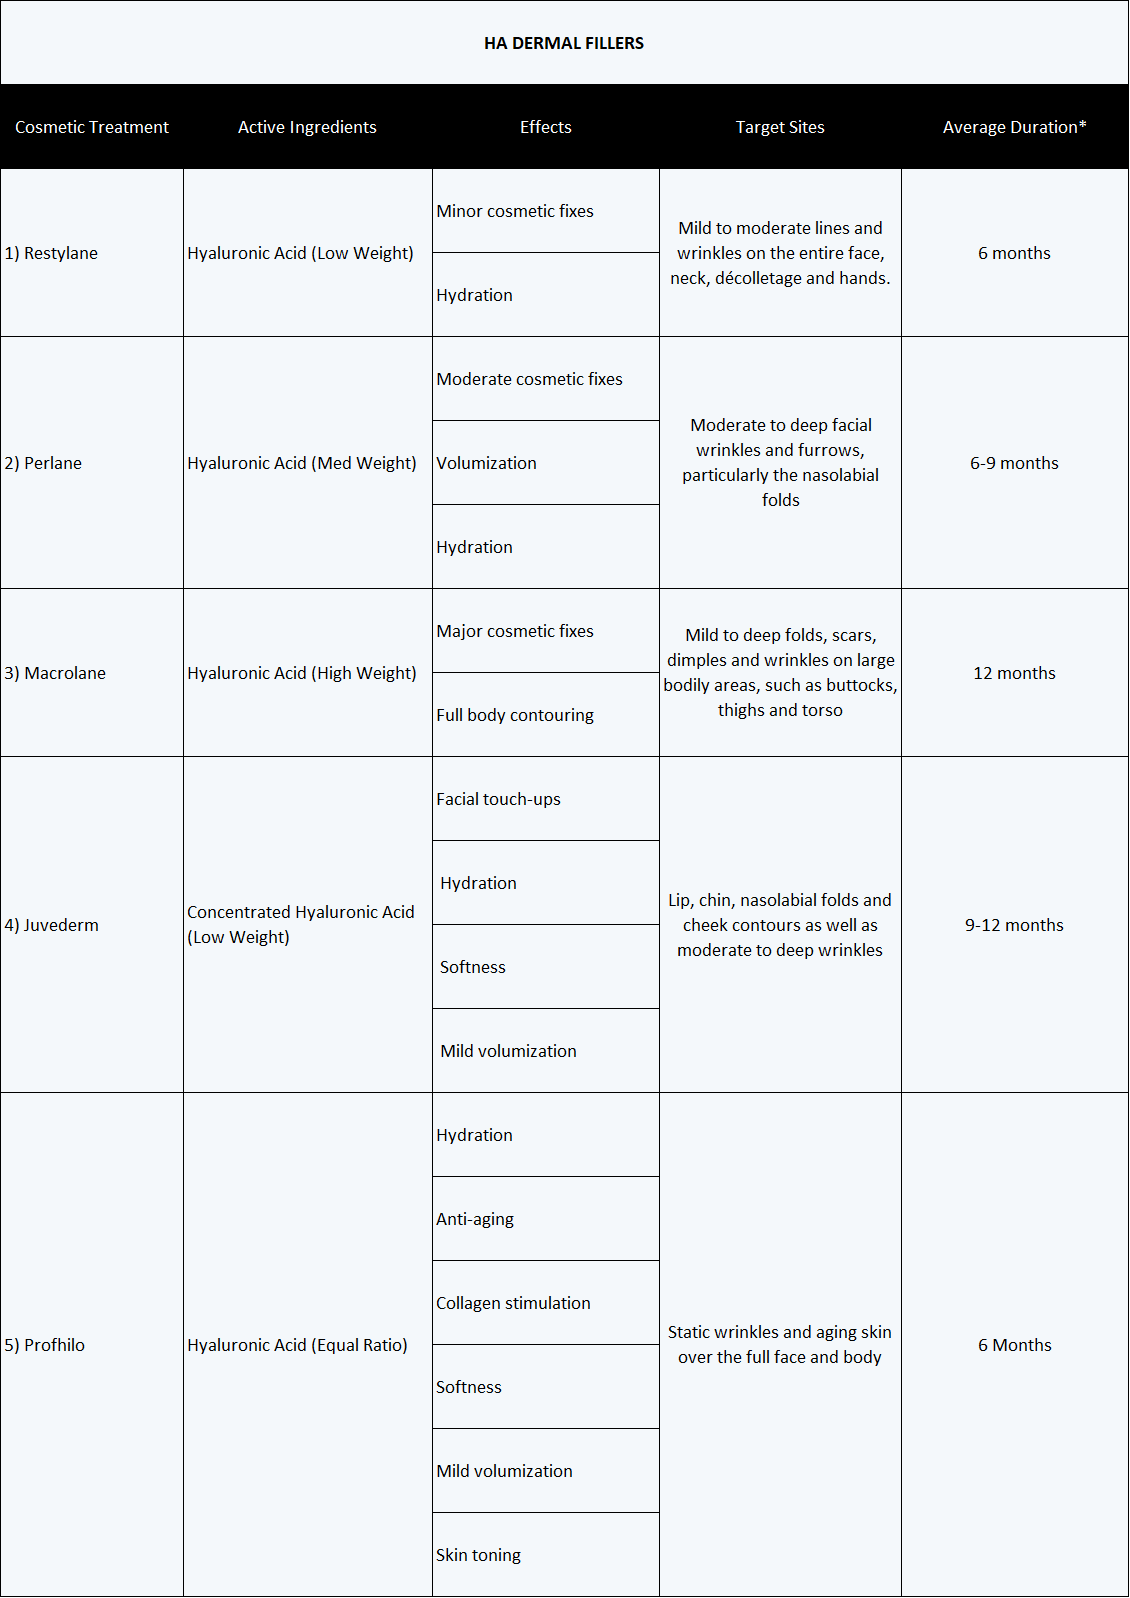 Table to show different cosmetic treatments options of Derma Fillers